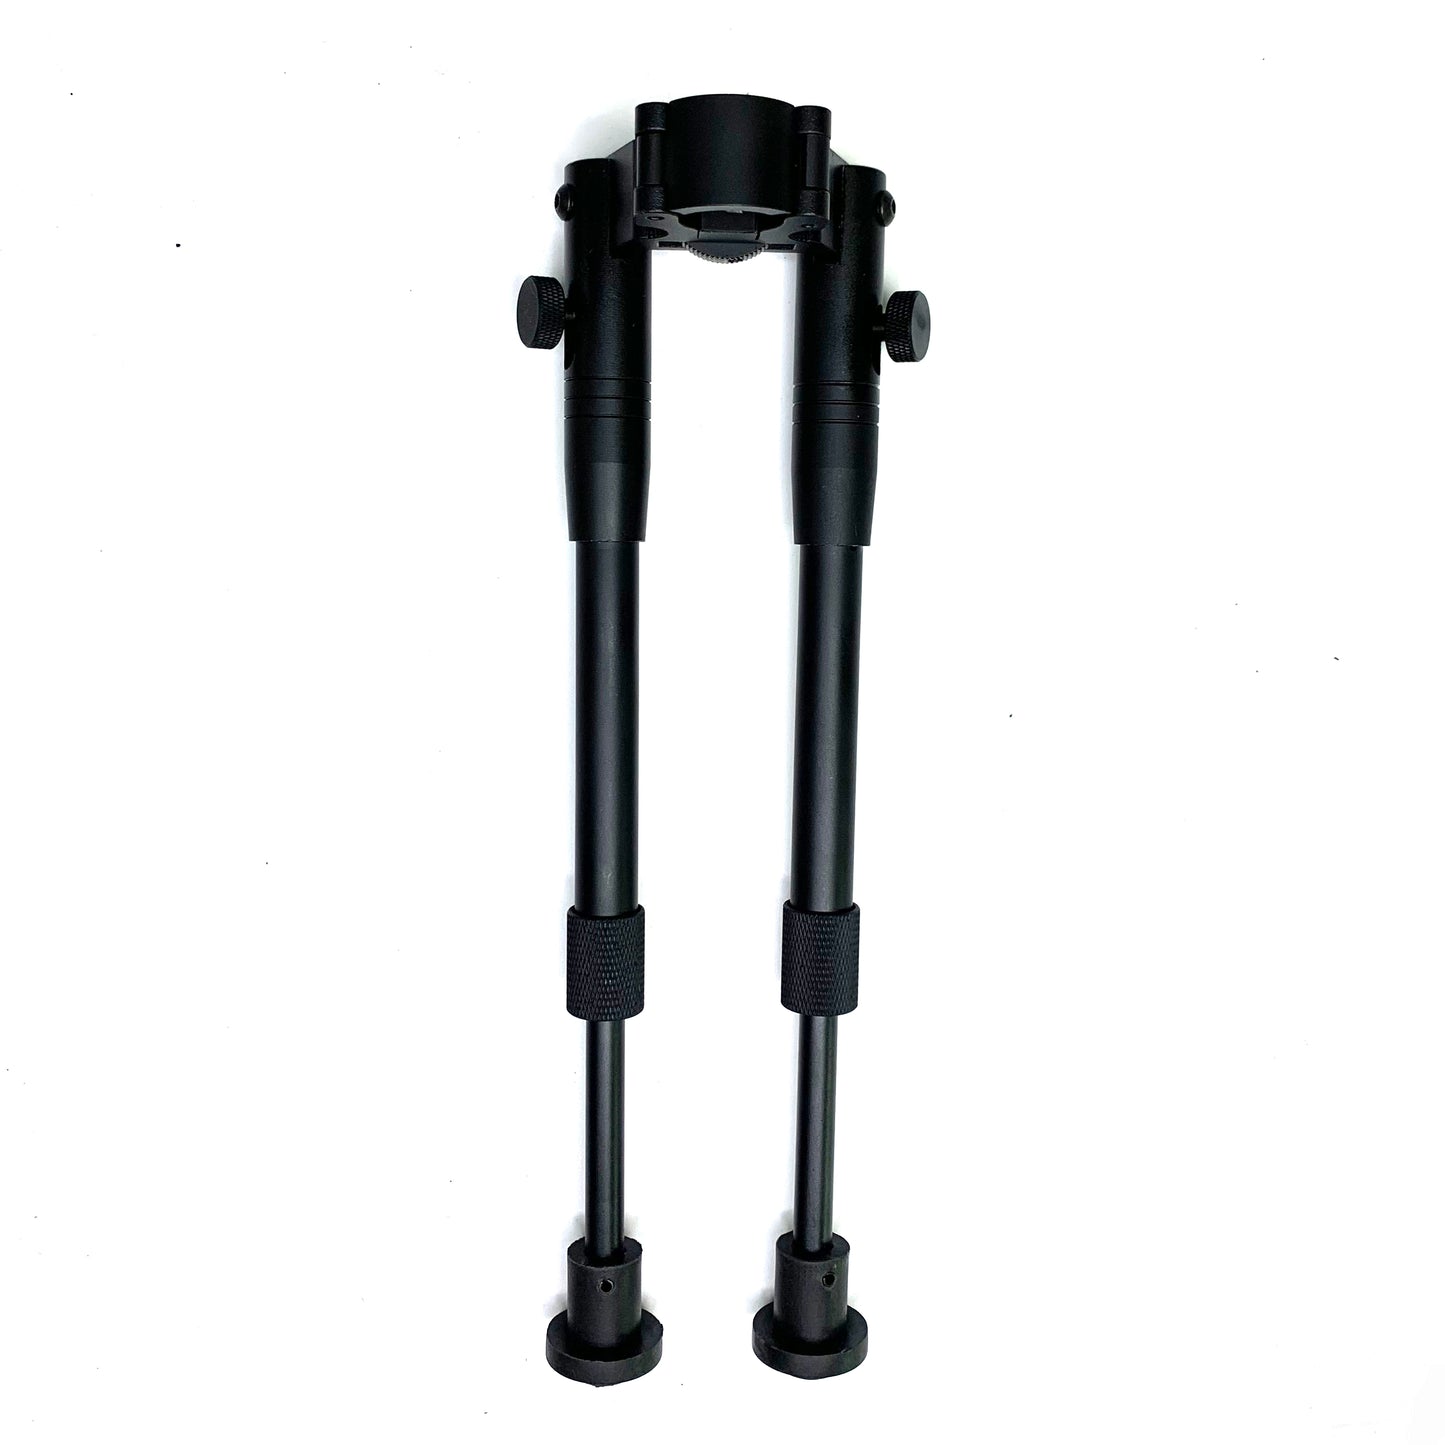 Ready-to-use Round Mouth Gun Bipods Stand